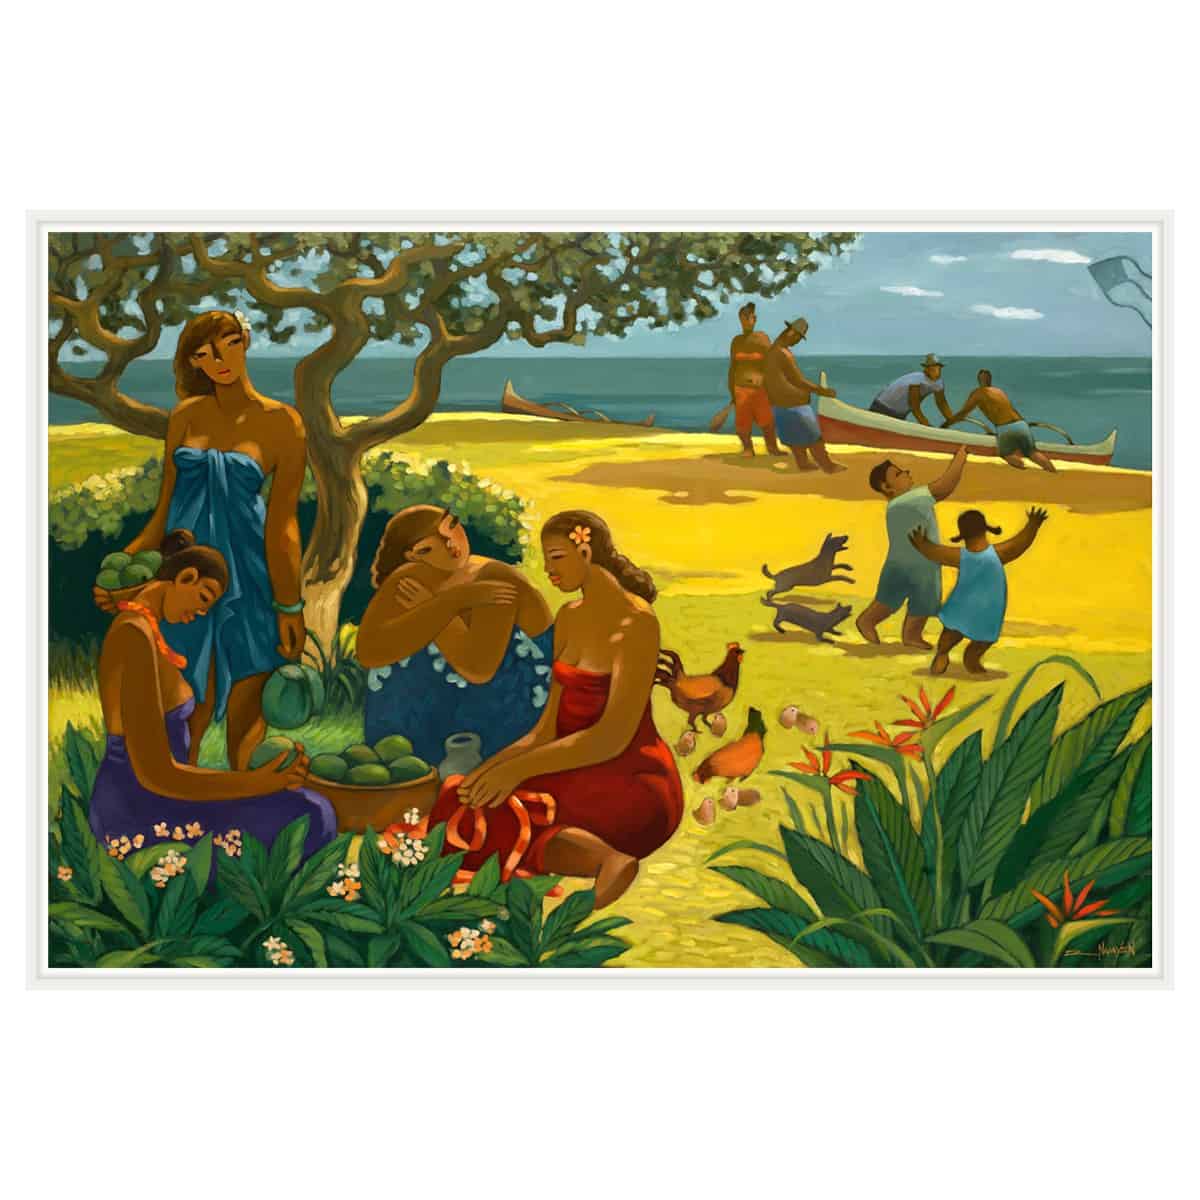 A framed canvas art print featuring Hawaiian beach activities with women gathering fruit, kids playing with dogs and chickens and men pulling in an outrigger canoe by Hawaii artist Tim Nguyen